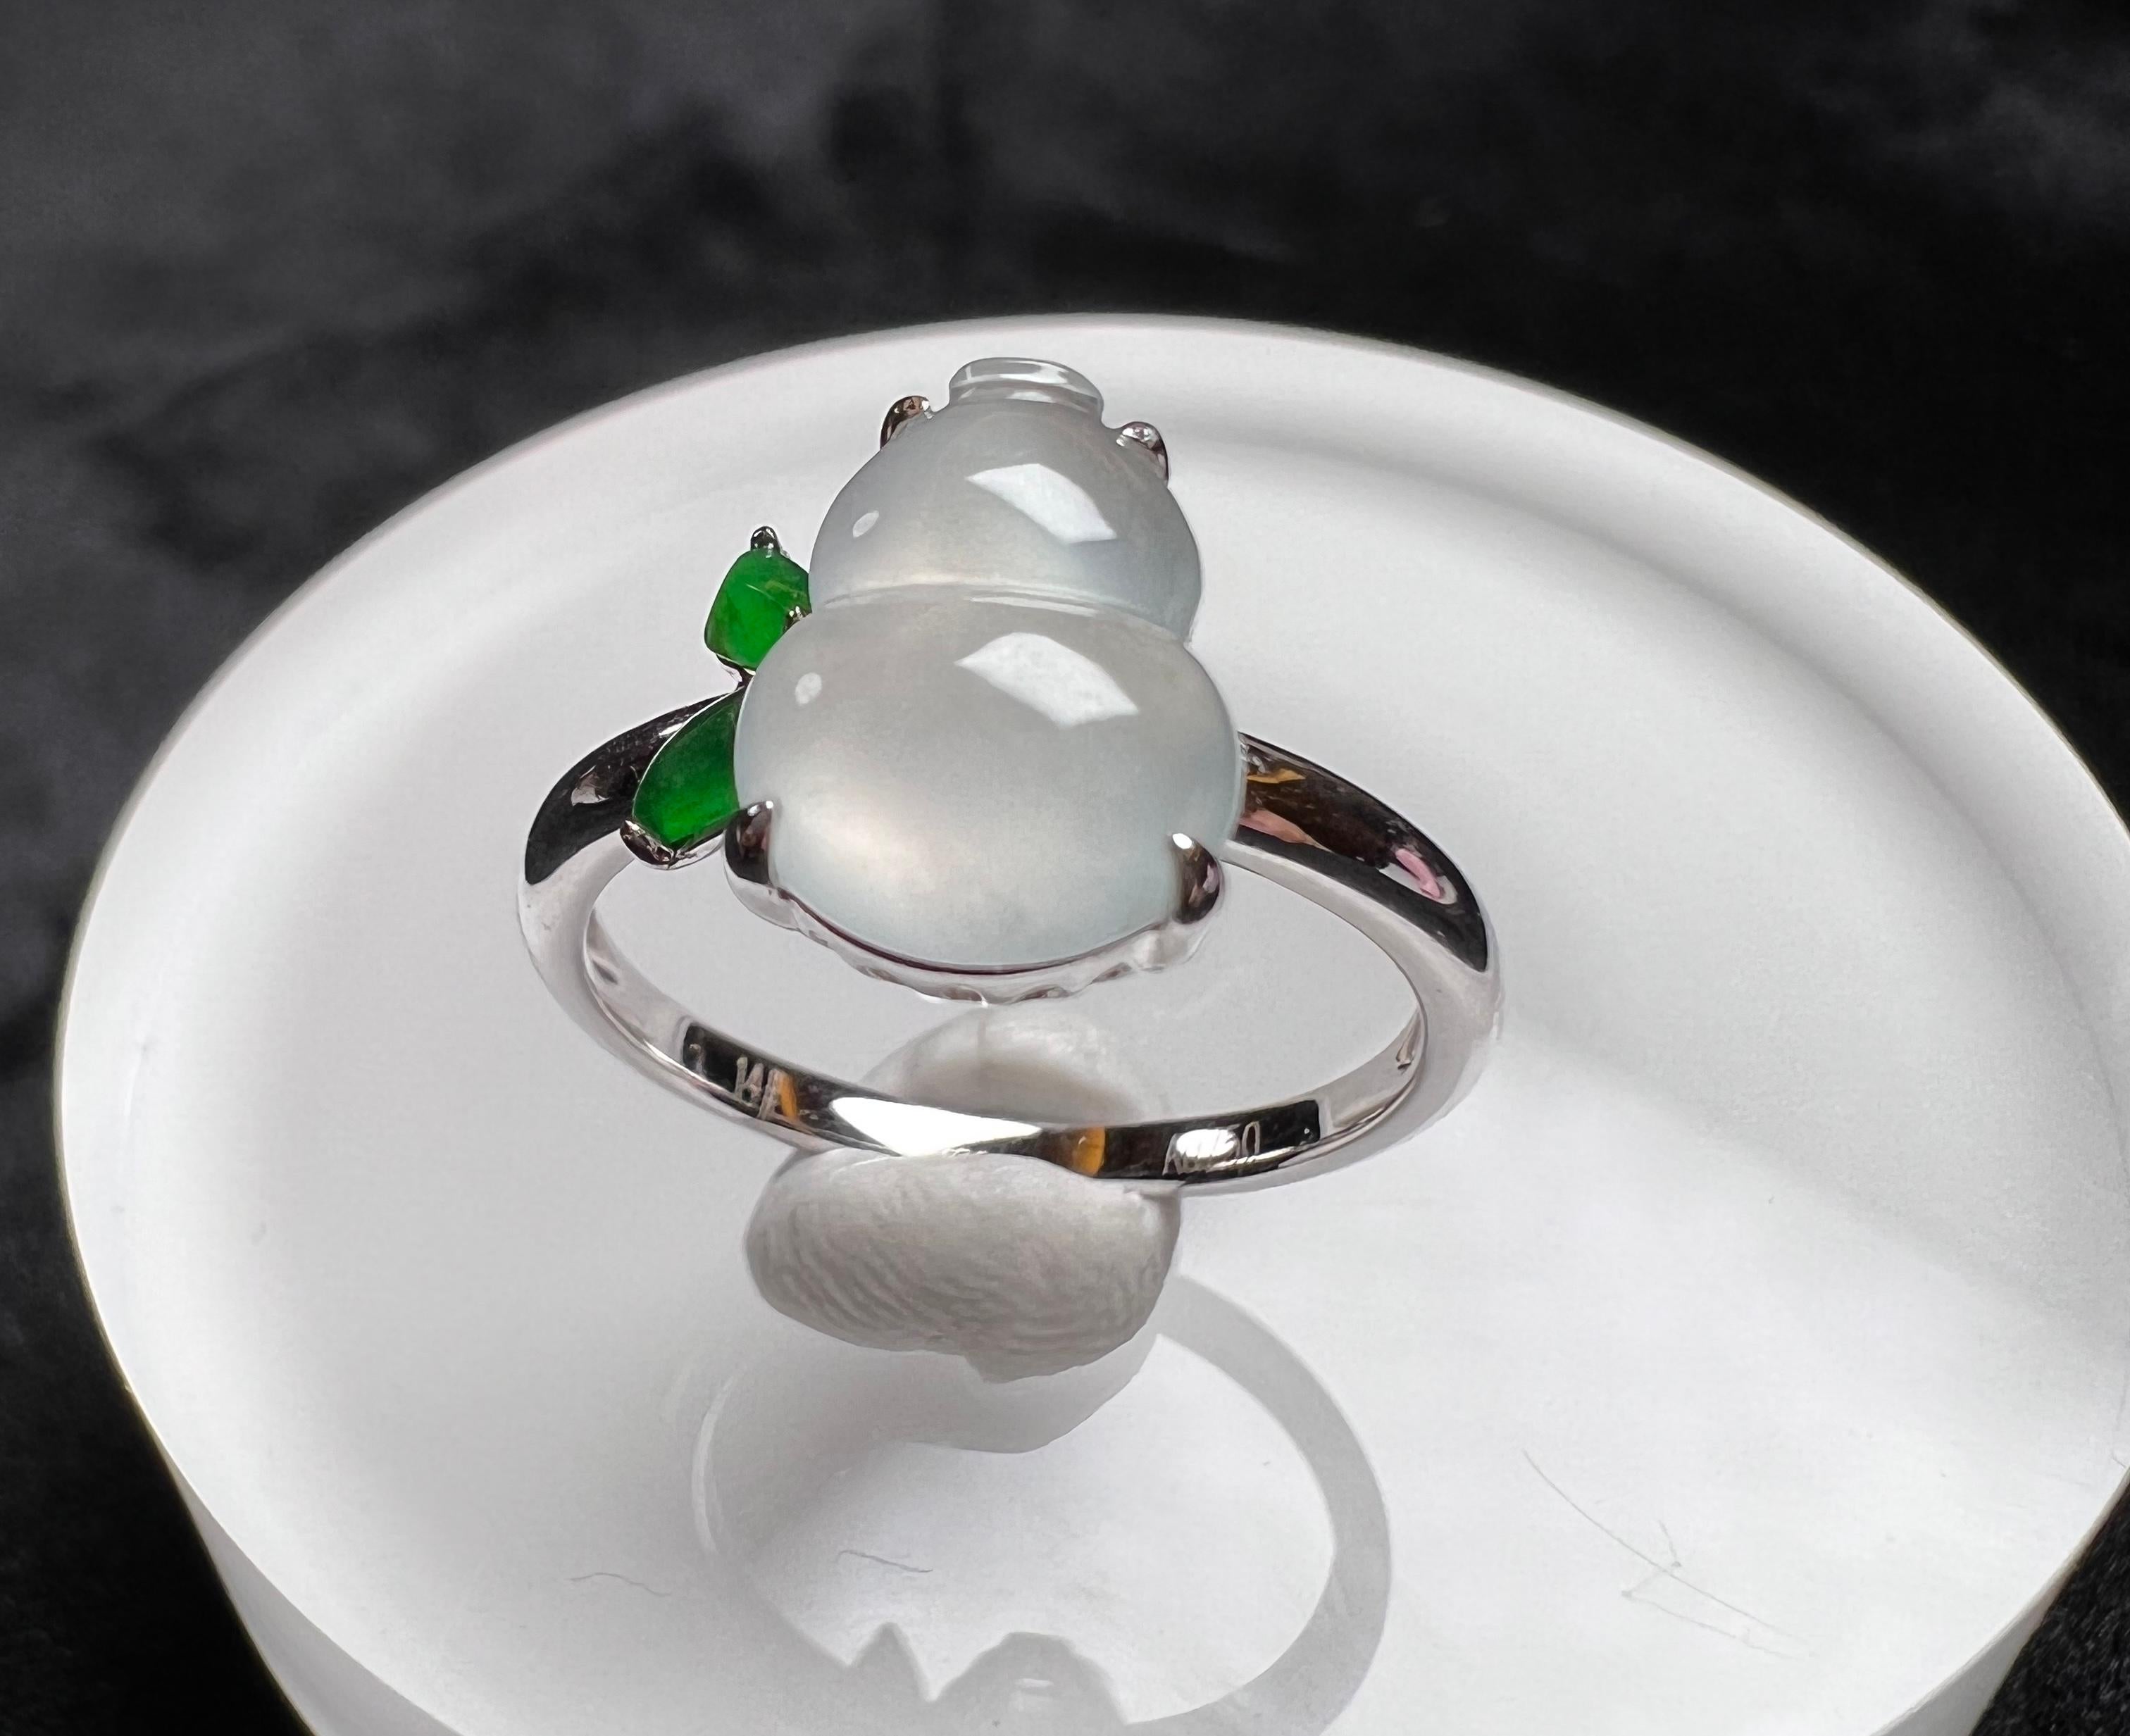 18K White Gold Icy Jadeite Green Jadeite Gourd Ring, Cocktail Ring

Size: N (UK) / 7 (US)
Circumference (approx.): 54mm
Diameter (approx.): 17.2mm

Total weight (approx.): 2.9g
Icy jadeite measurement (approx.): 10.9*8mm
Green jadeite measurement